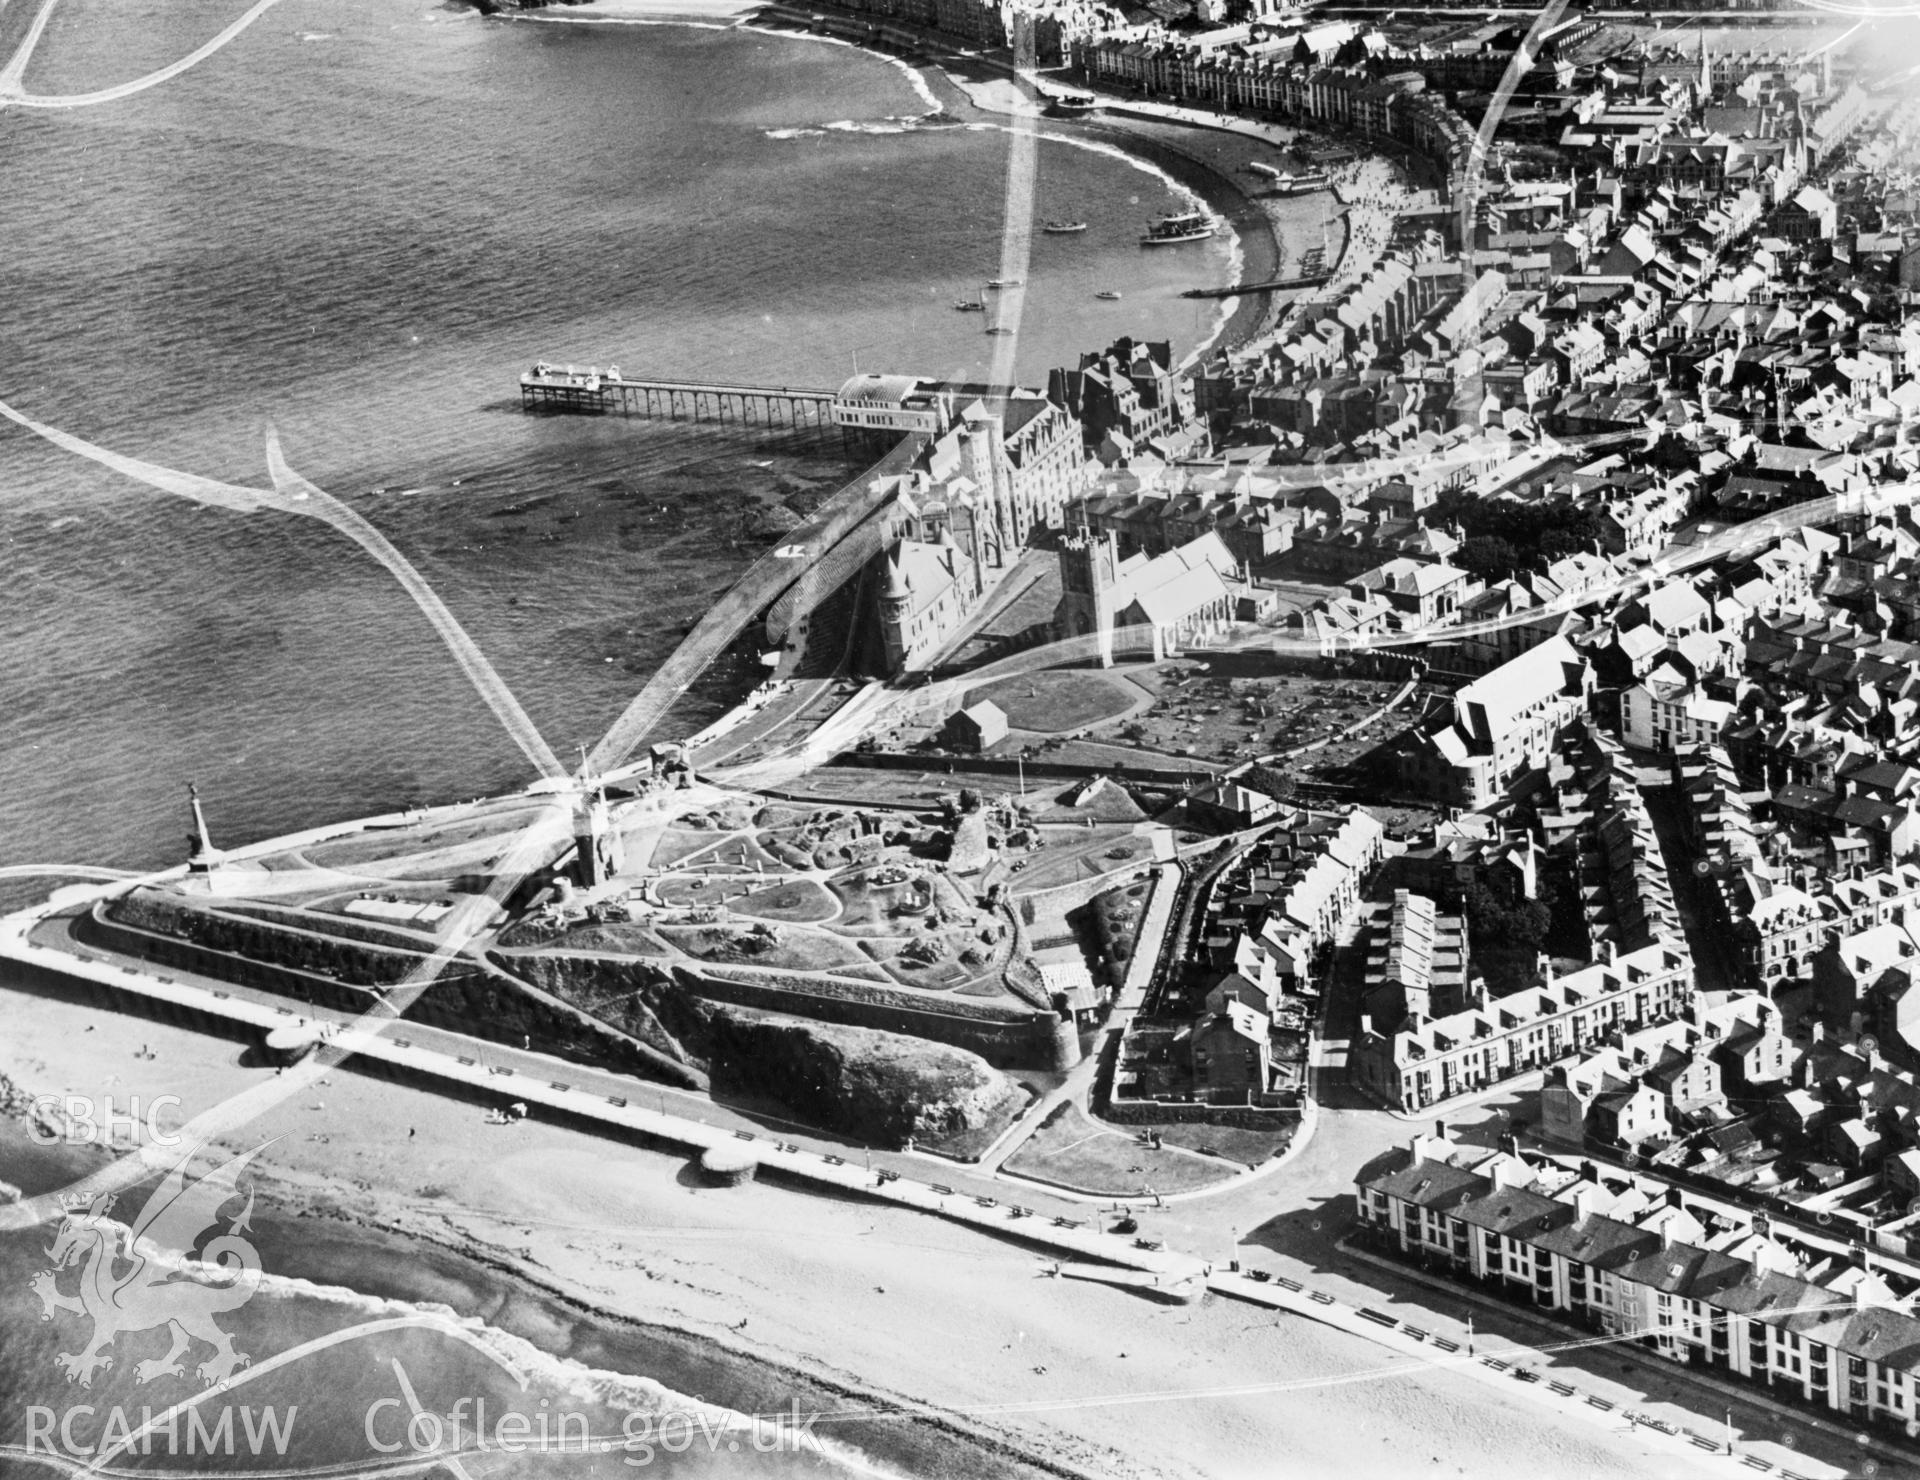 View of Aberystwyth showing castle and New Promenade area. Oblique aerial photograph, 5?x4? BW glass plate.